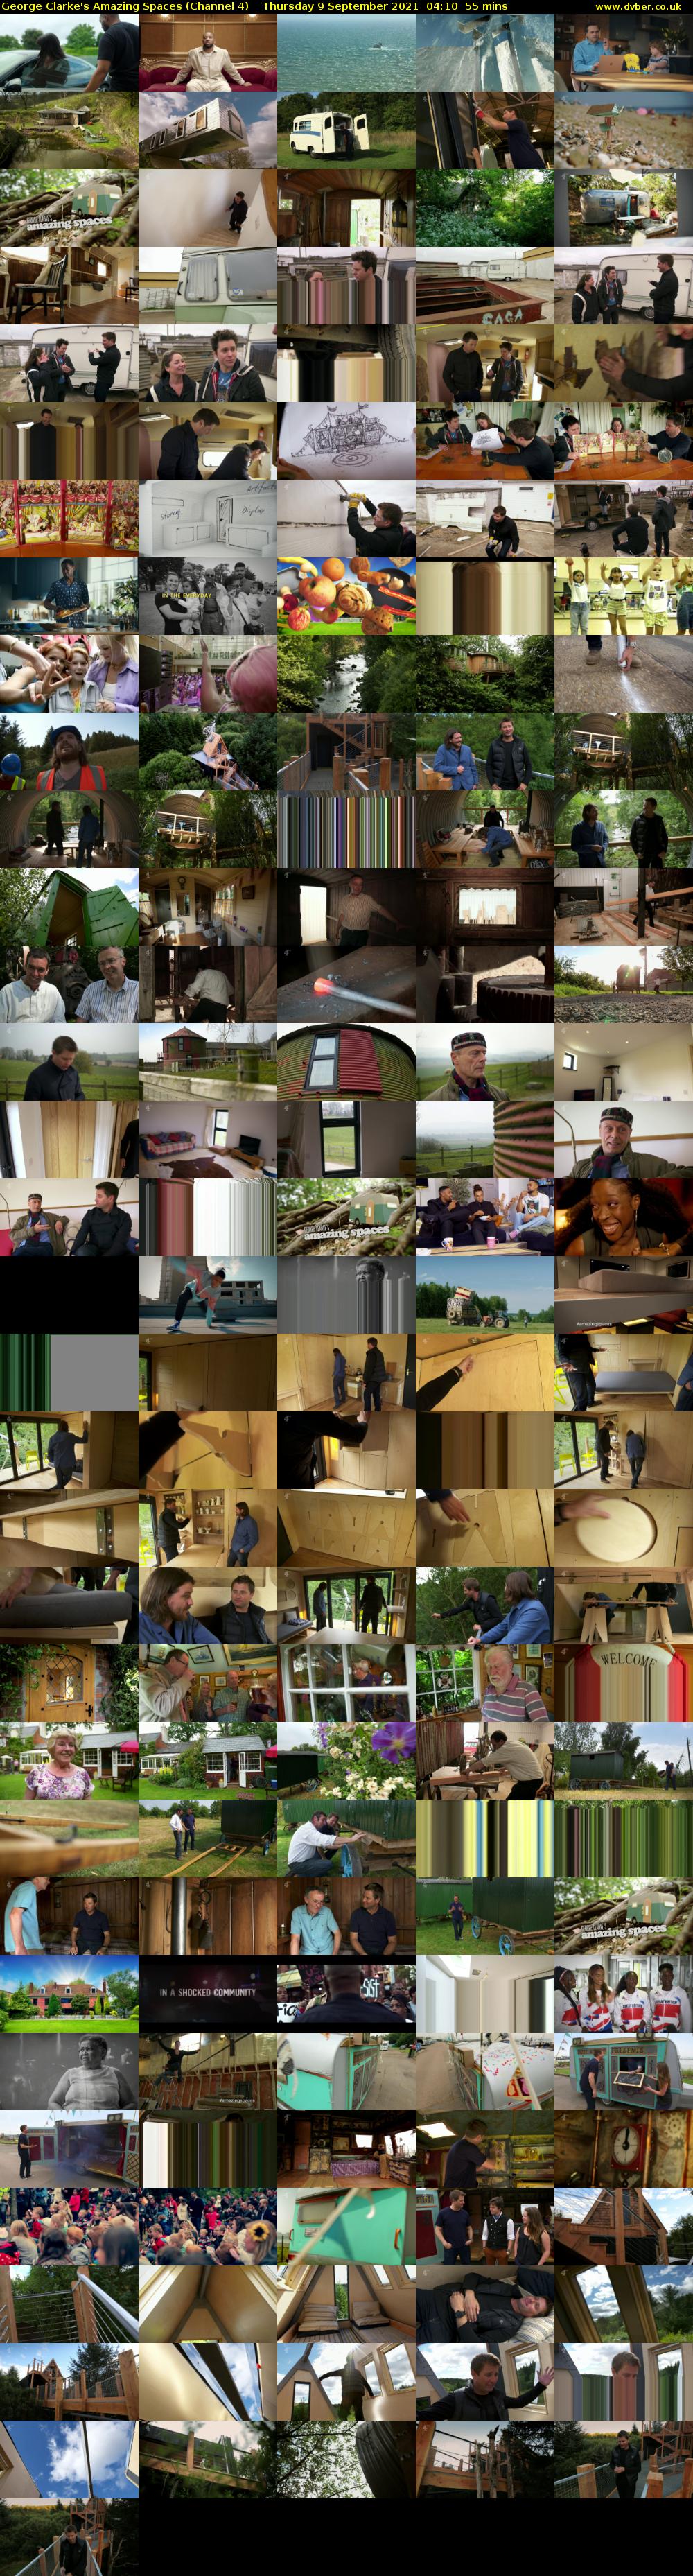 George Clarke's Amazing Spaces (Channel 4) Thursday 9 September 2021 04:10 - 05:05